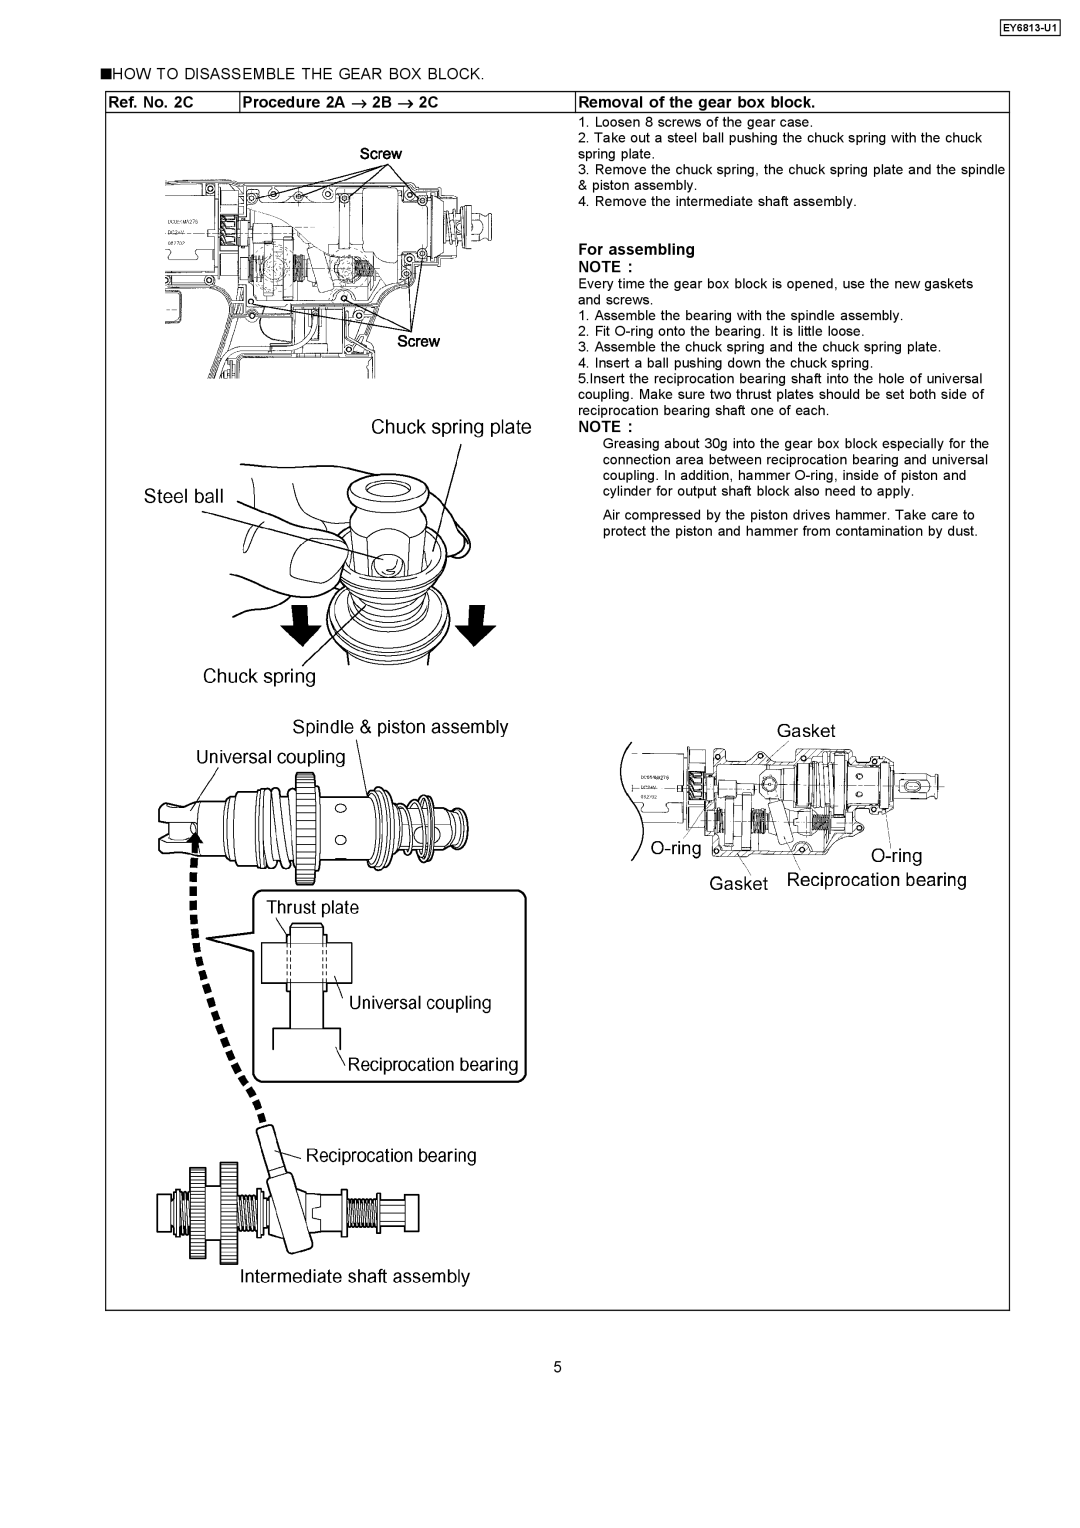 Panasonic EY6813-U1 specifications HOW to Disassemble the Gear BOX Block 